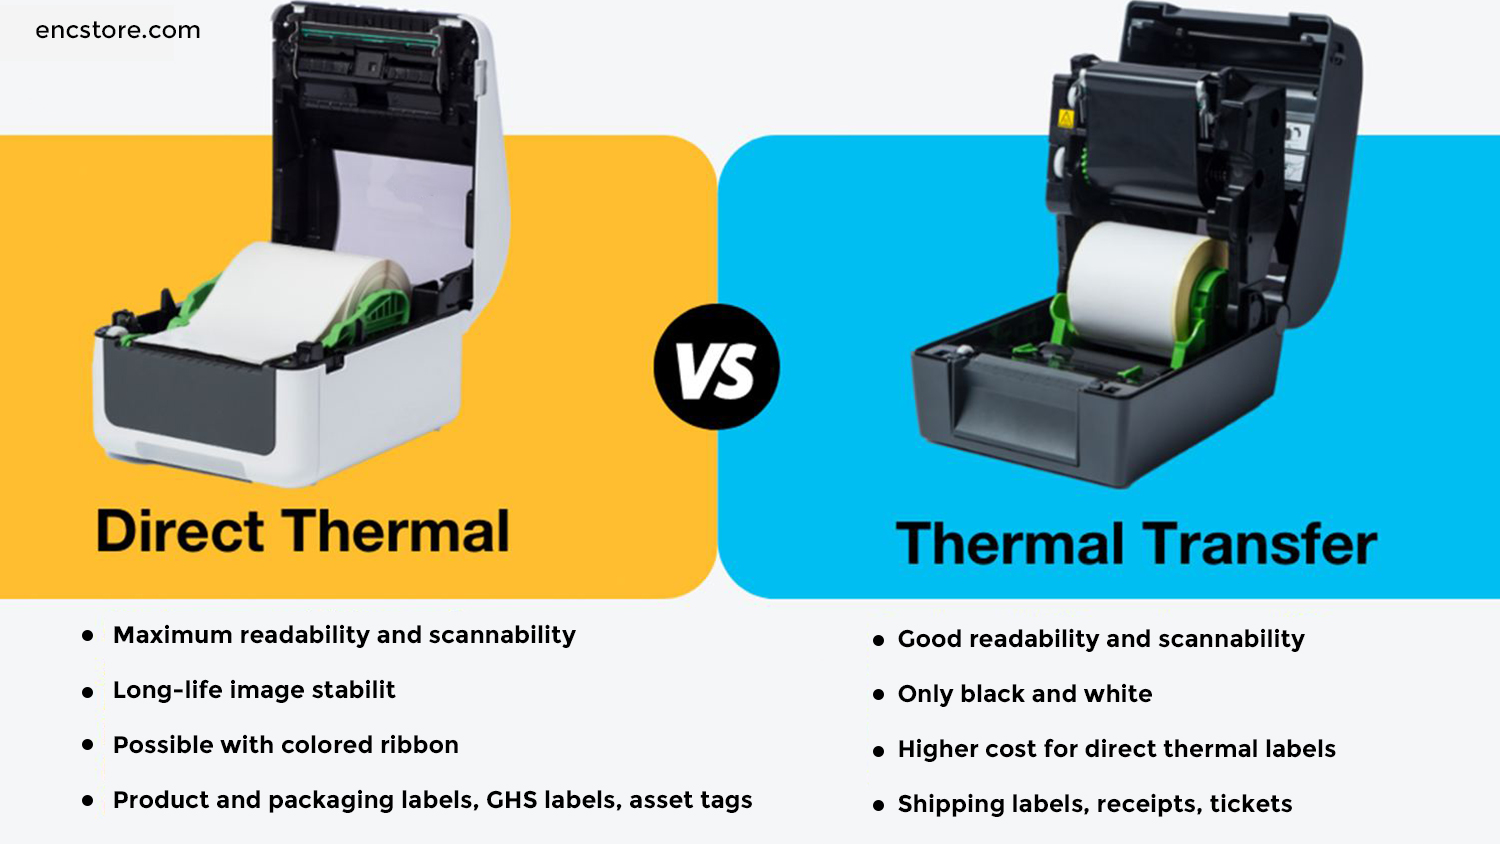 What is the difference between direct thermal and thermal transfer printers?